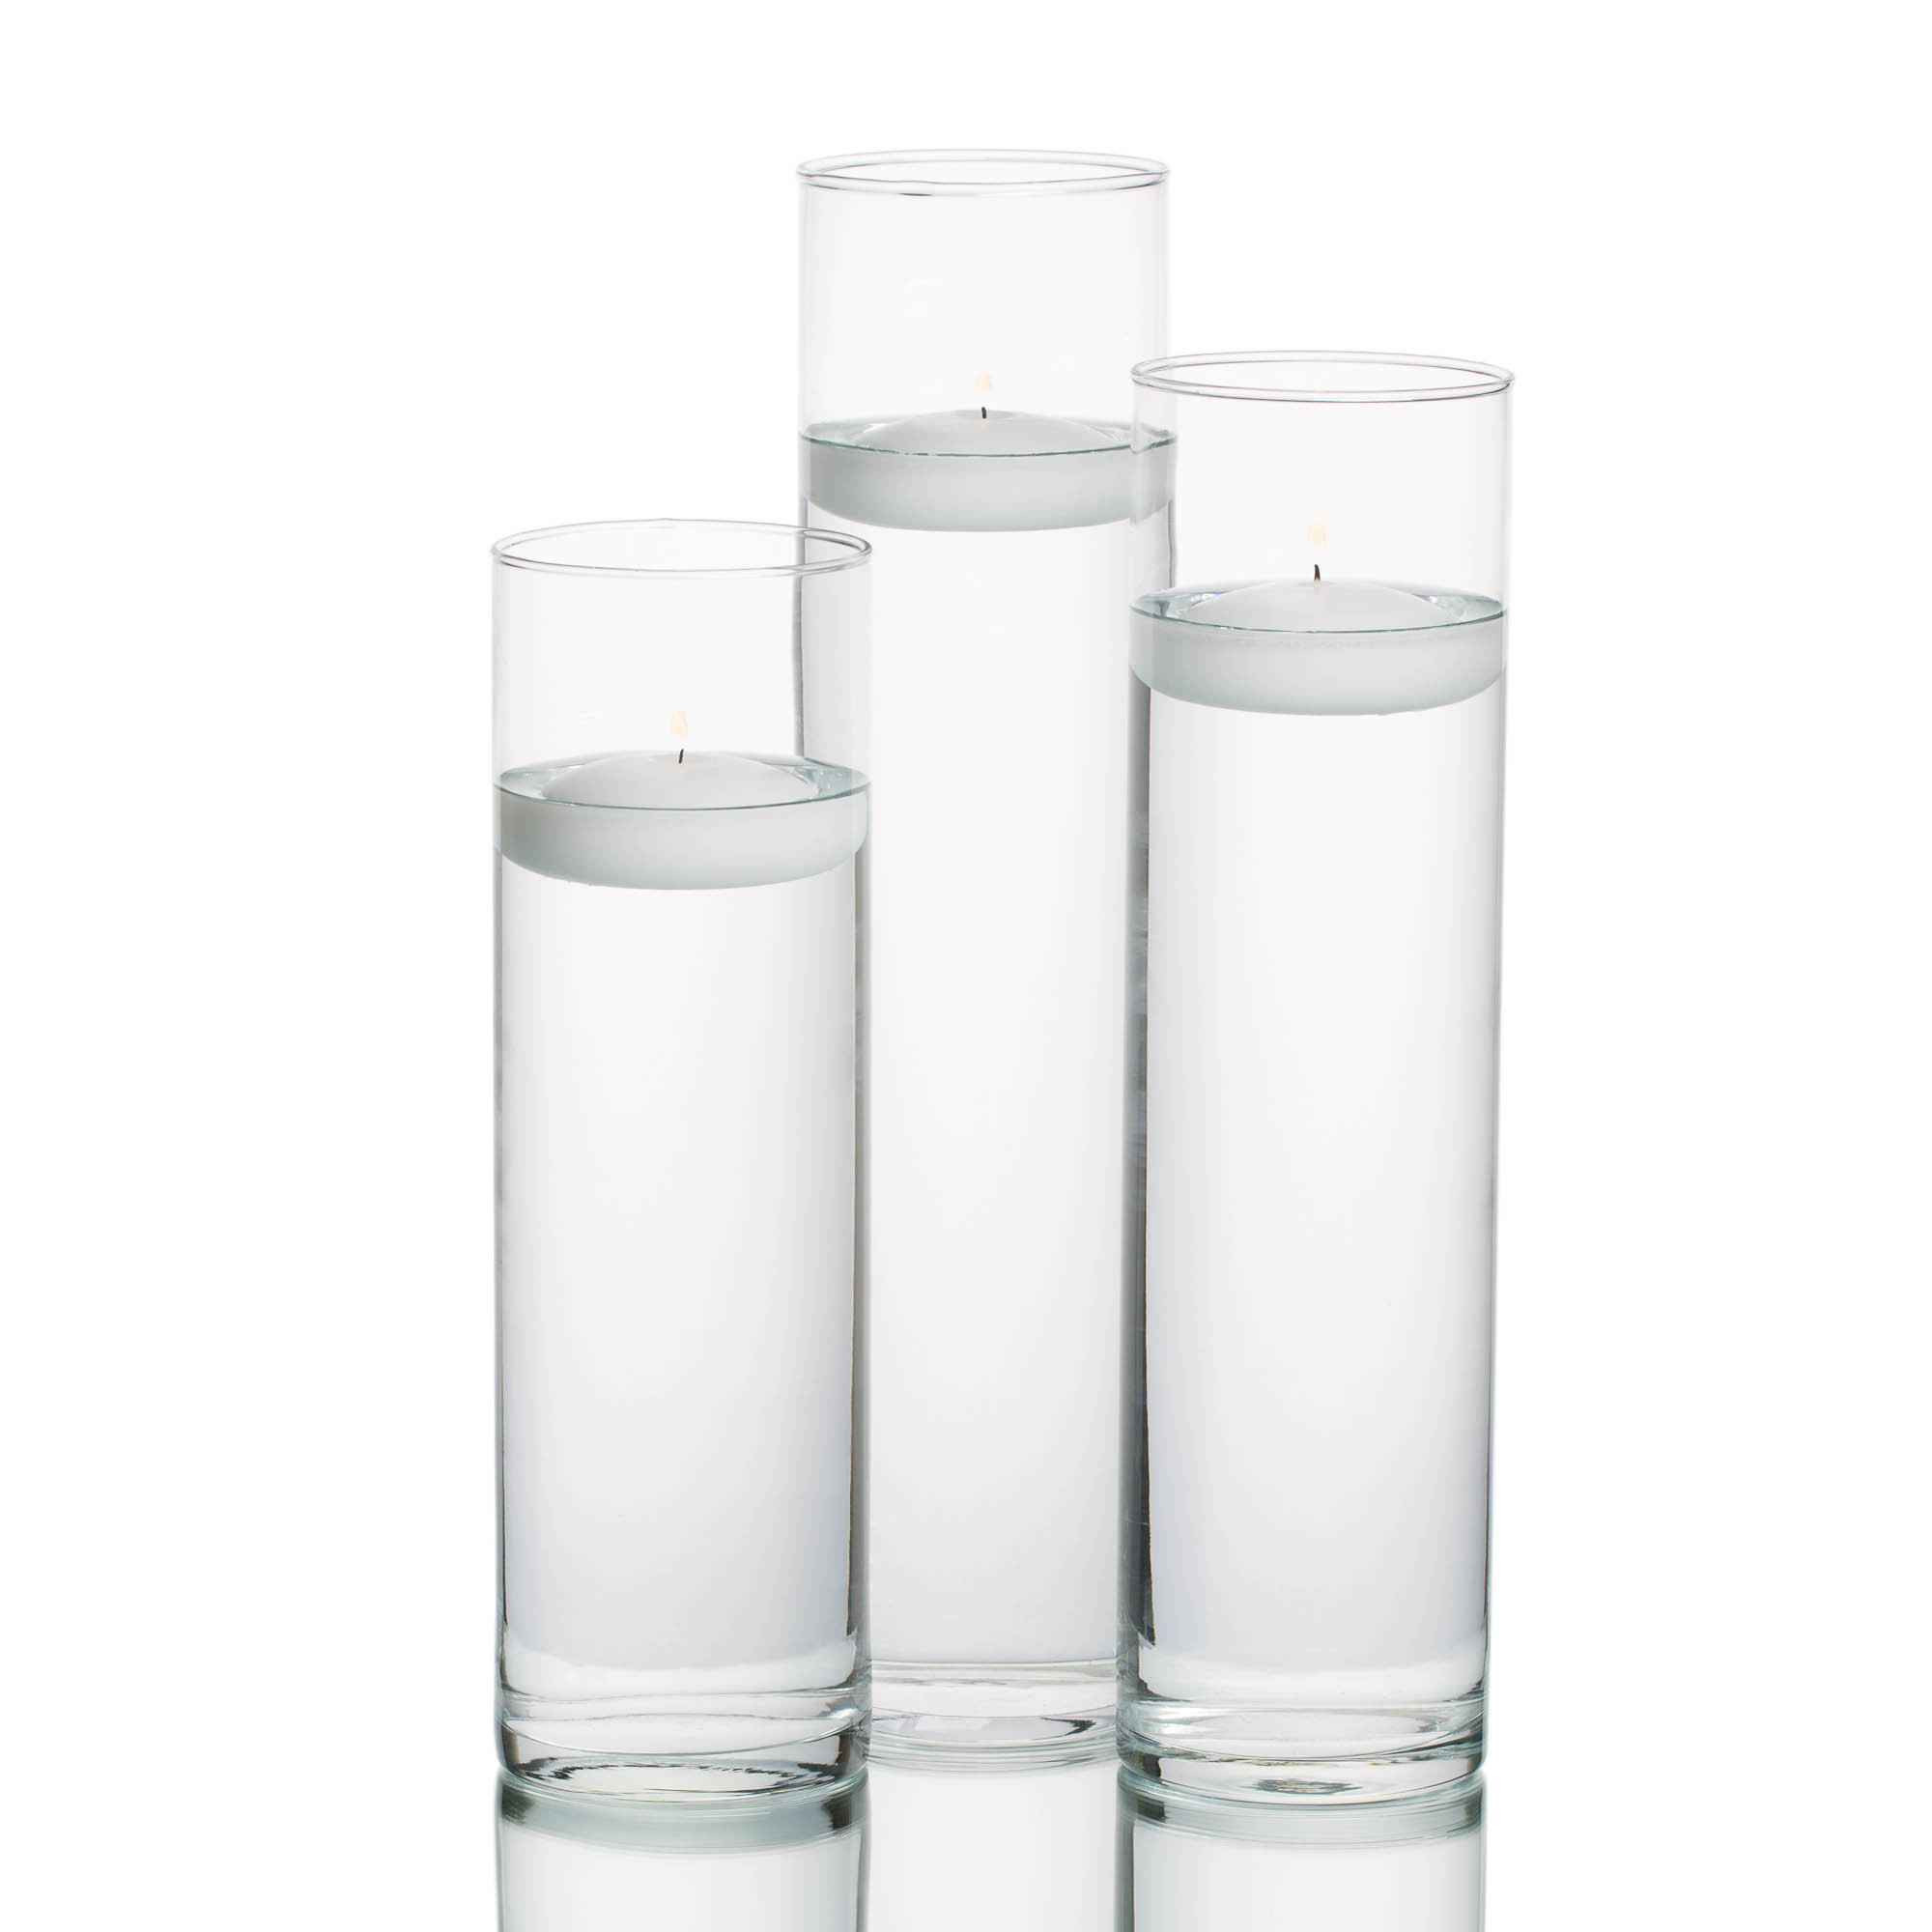 Floating Candle Cylinder Vase Sets Of Slash Prices On Abbott Collection Nautical Glass Hurricane with Regard to Ksp Flare Tealight Holder Set From 3 Set Glass Candle